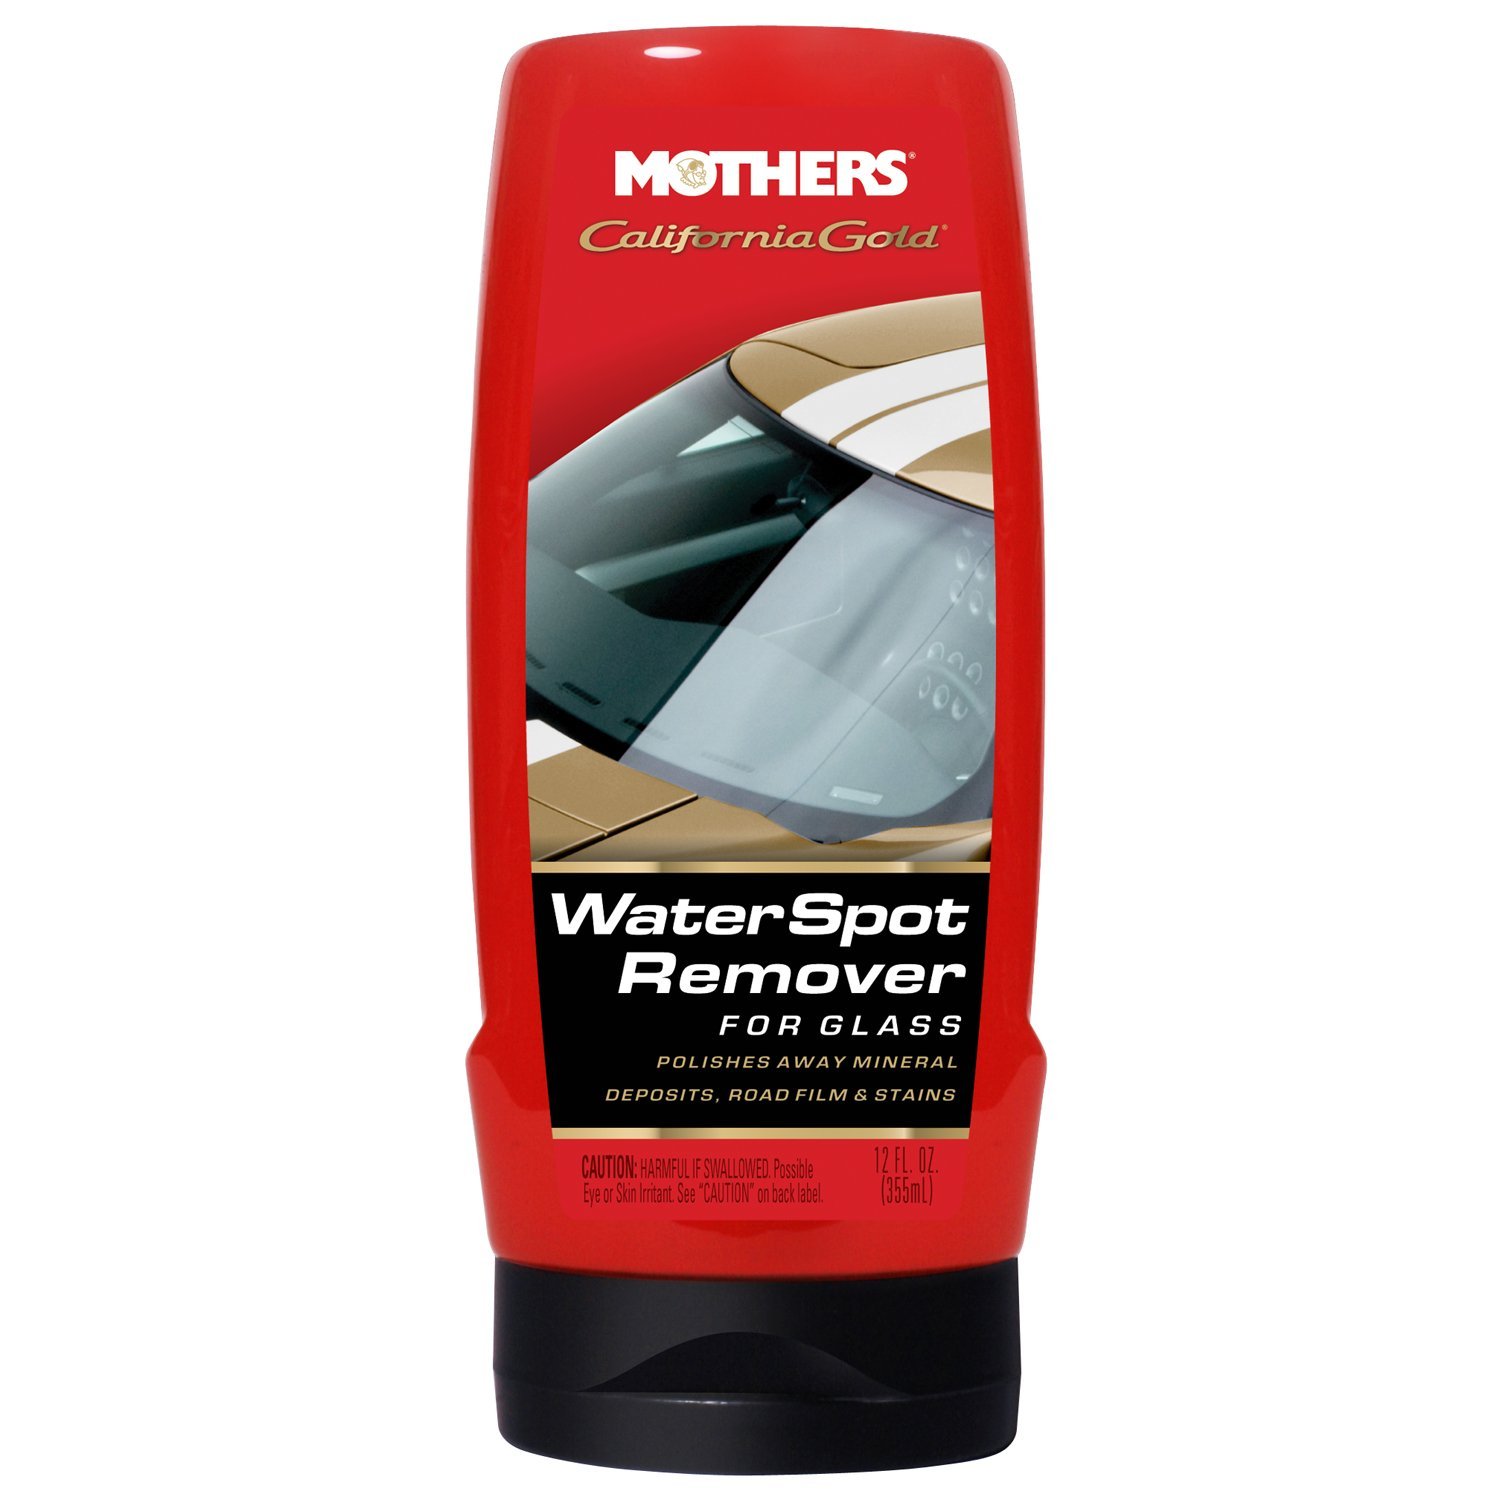 mothers-california-gold-water-spot-remover-for-glass-ats-0275